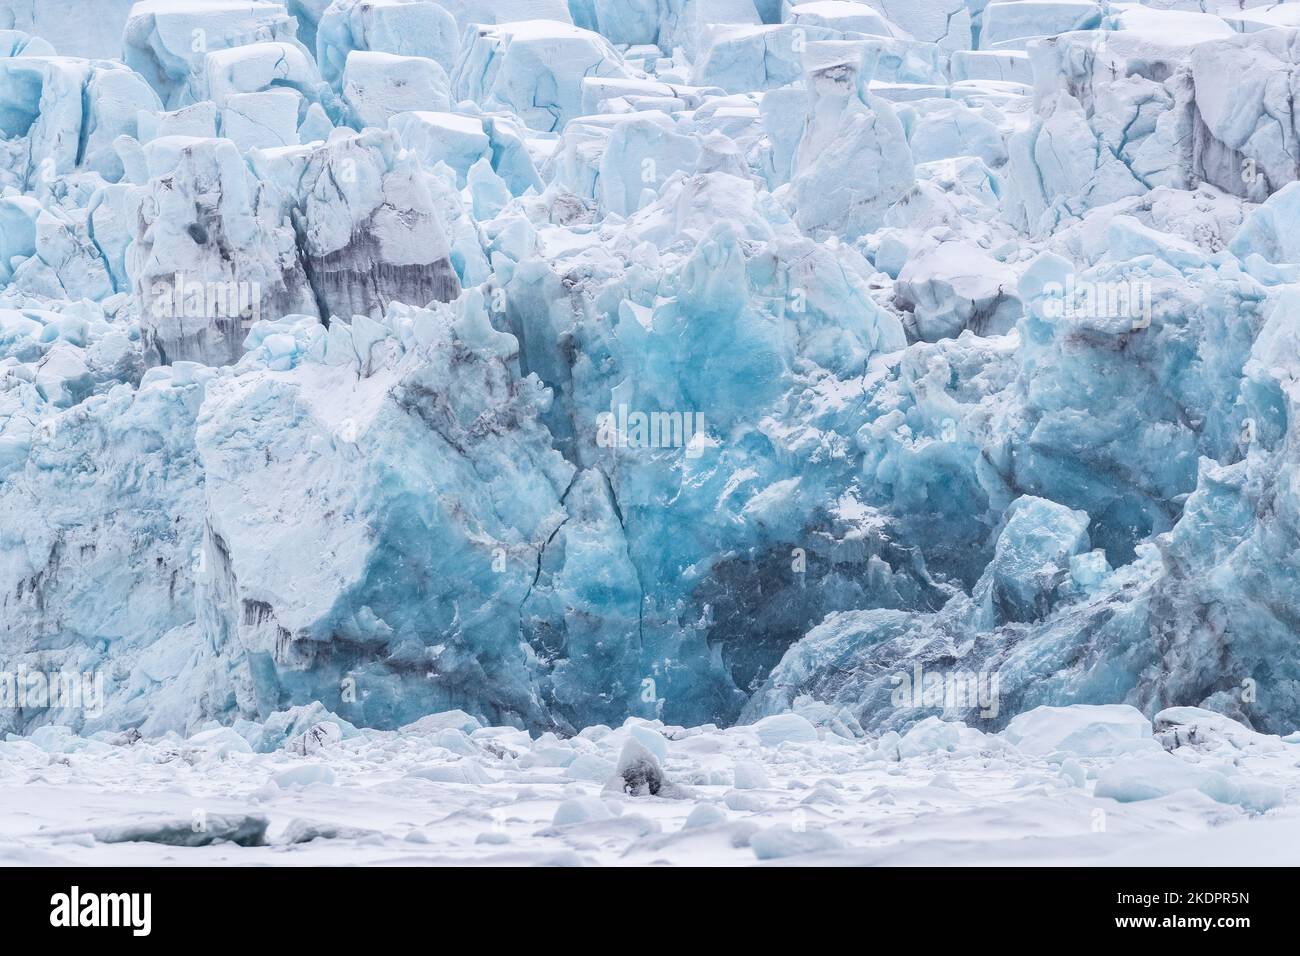 Front edge of a glacier in Svalbard, a Norwegian archipelago between mainland Norway and the North Pole, showing a crack in the ice as it is about to Stock Photo